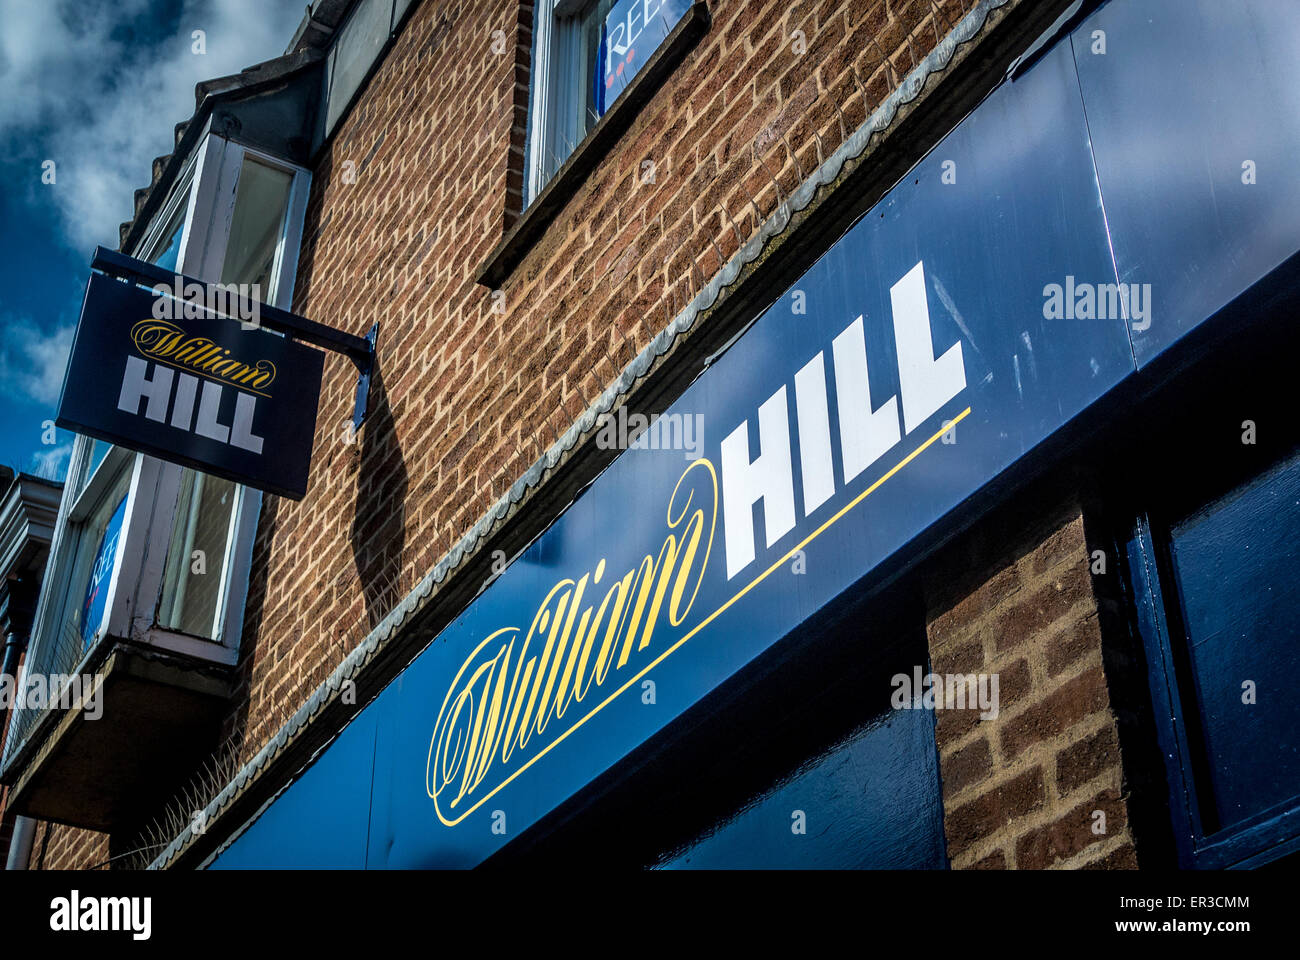 William Hill betting shop sign Banque D'Images